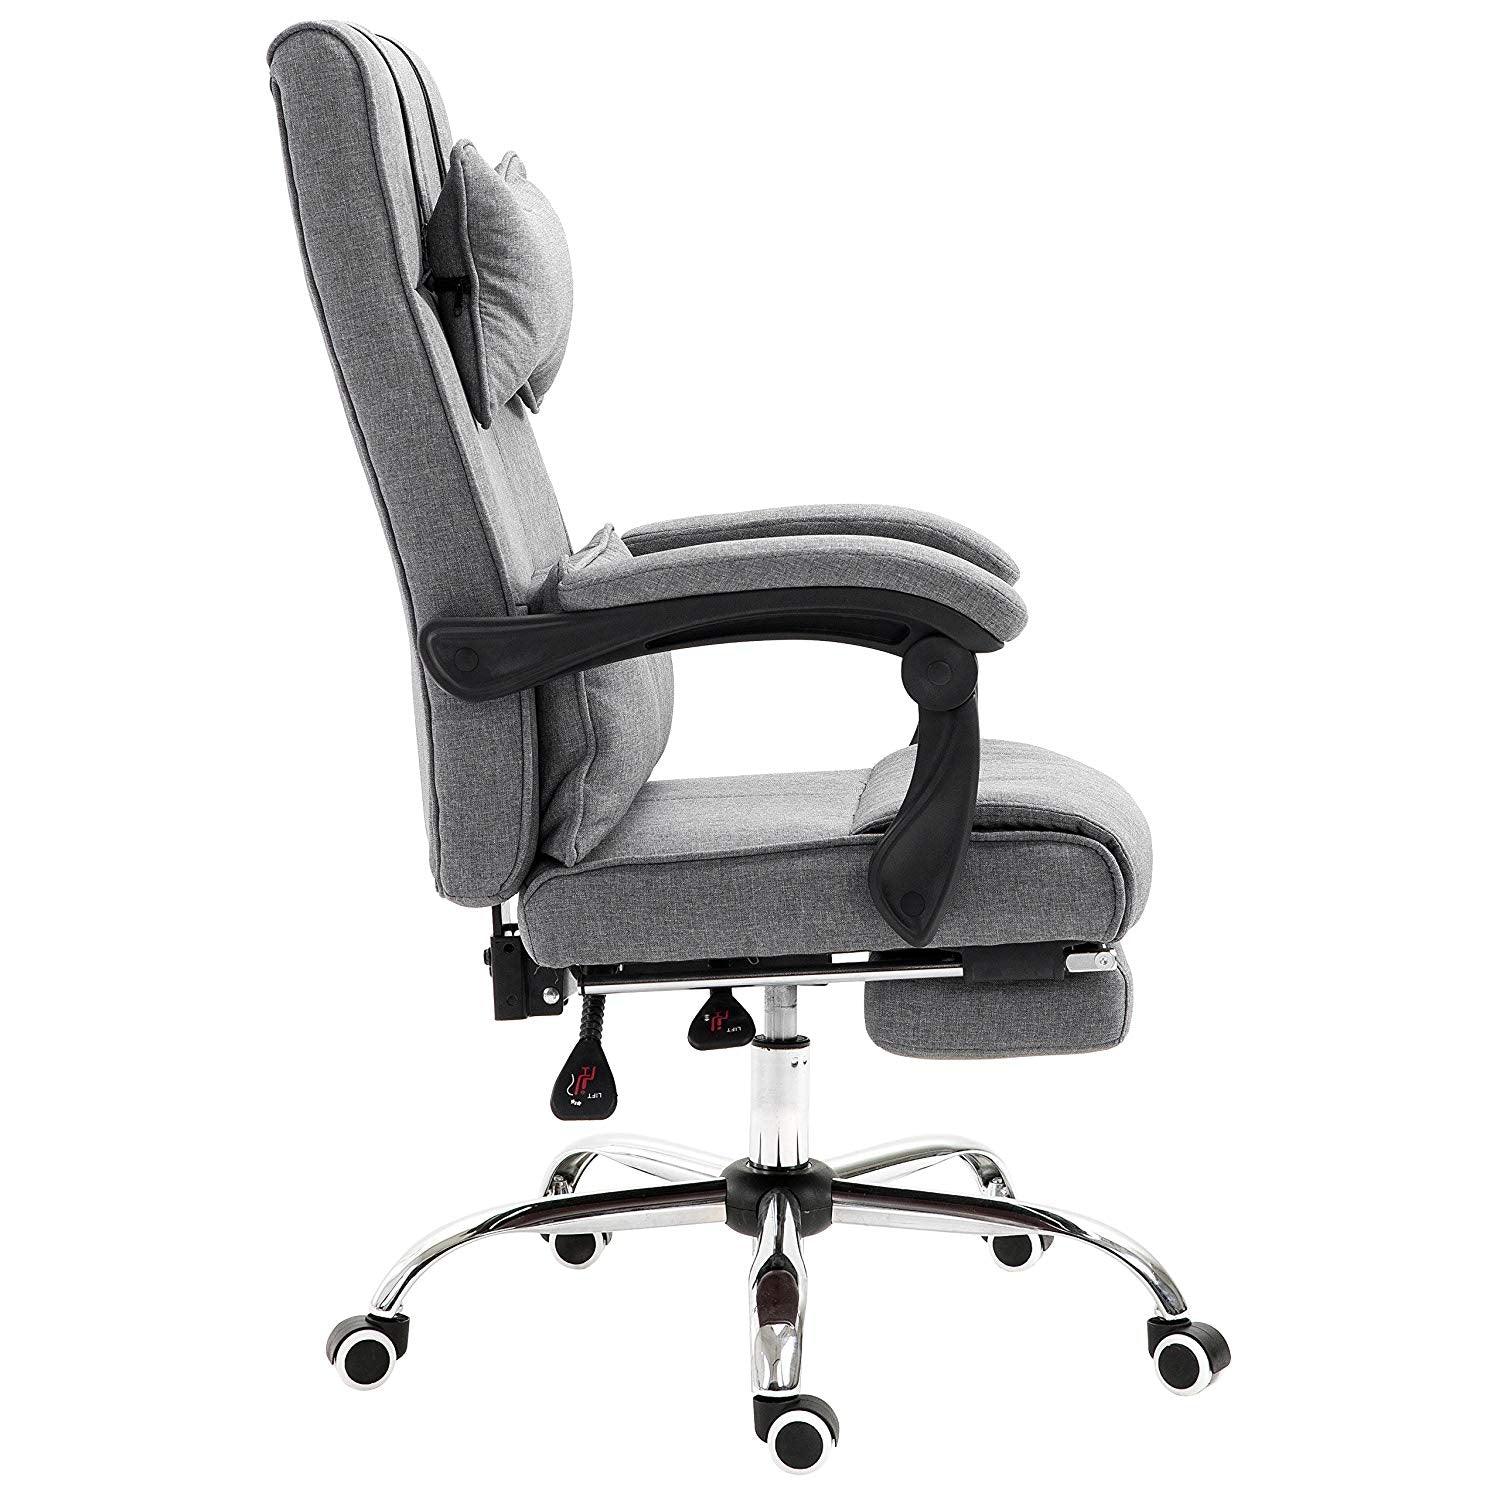 Lawrence Executive Reclining Chair with Foot and Headrest in Grey